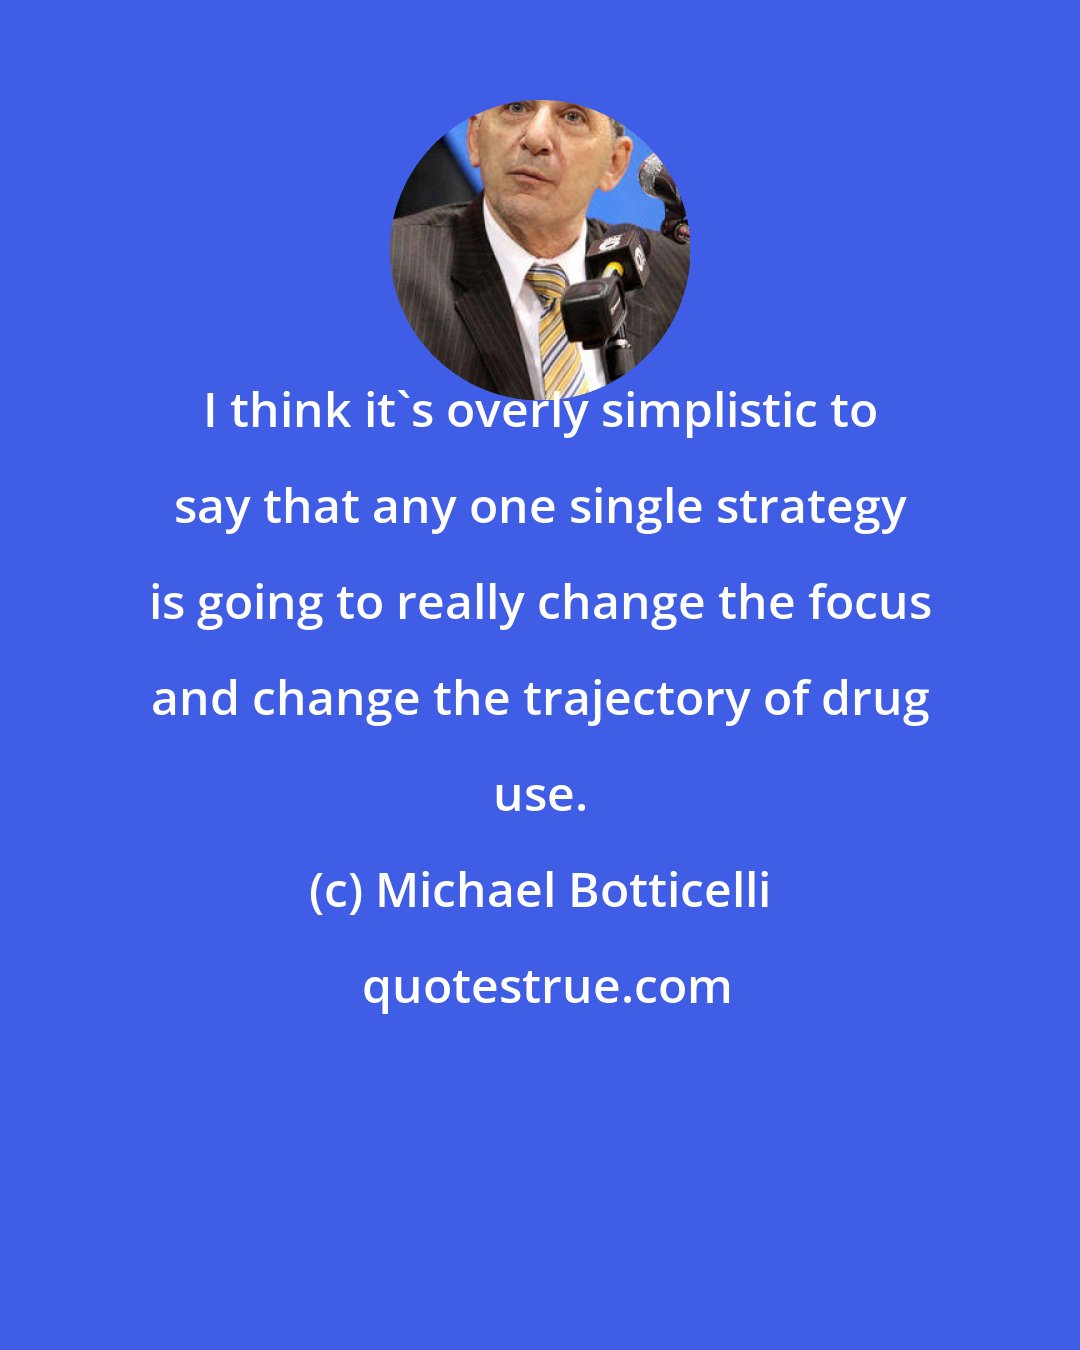 Michael Botticelli: I think it's overly simplistic to say that any one single strategy is going to really change the focus and change the trajectory of drug use.